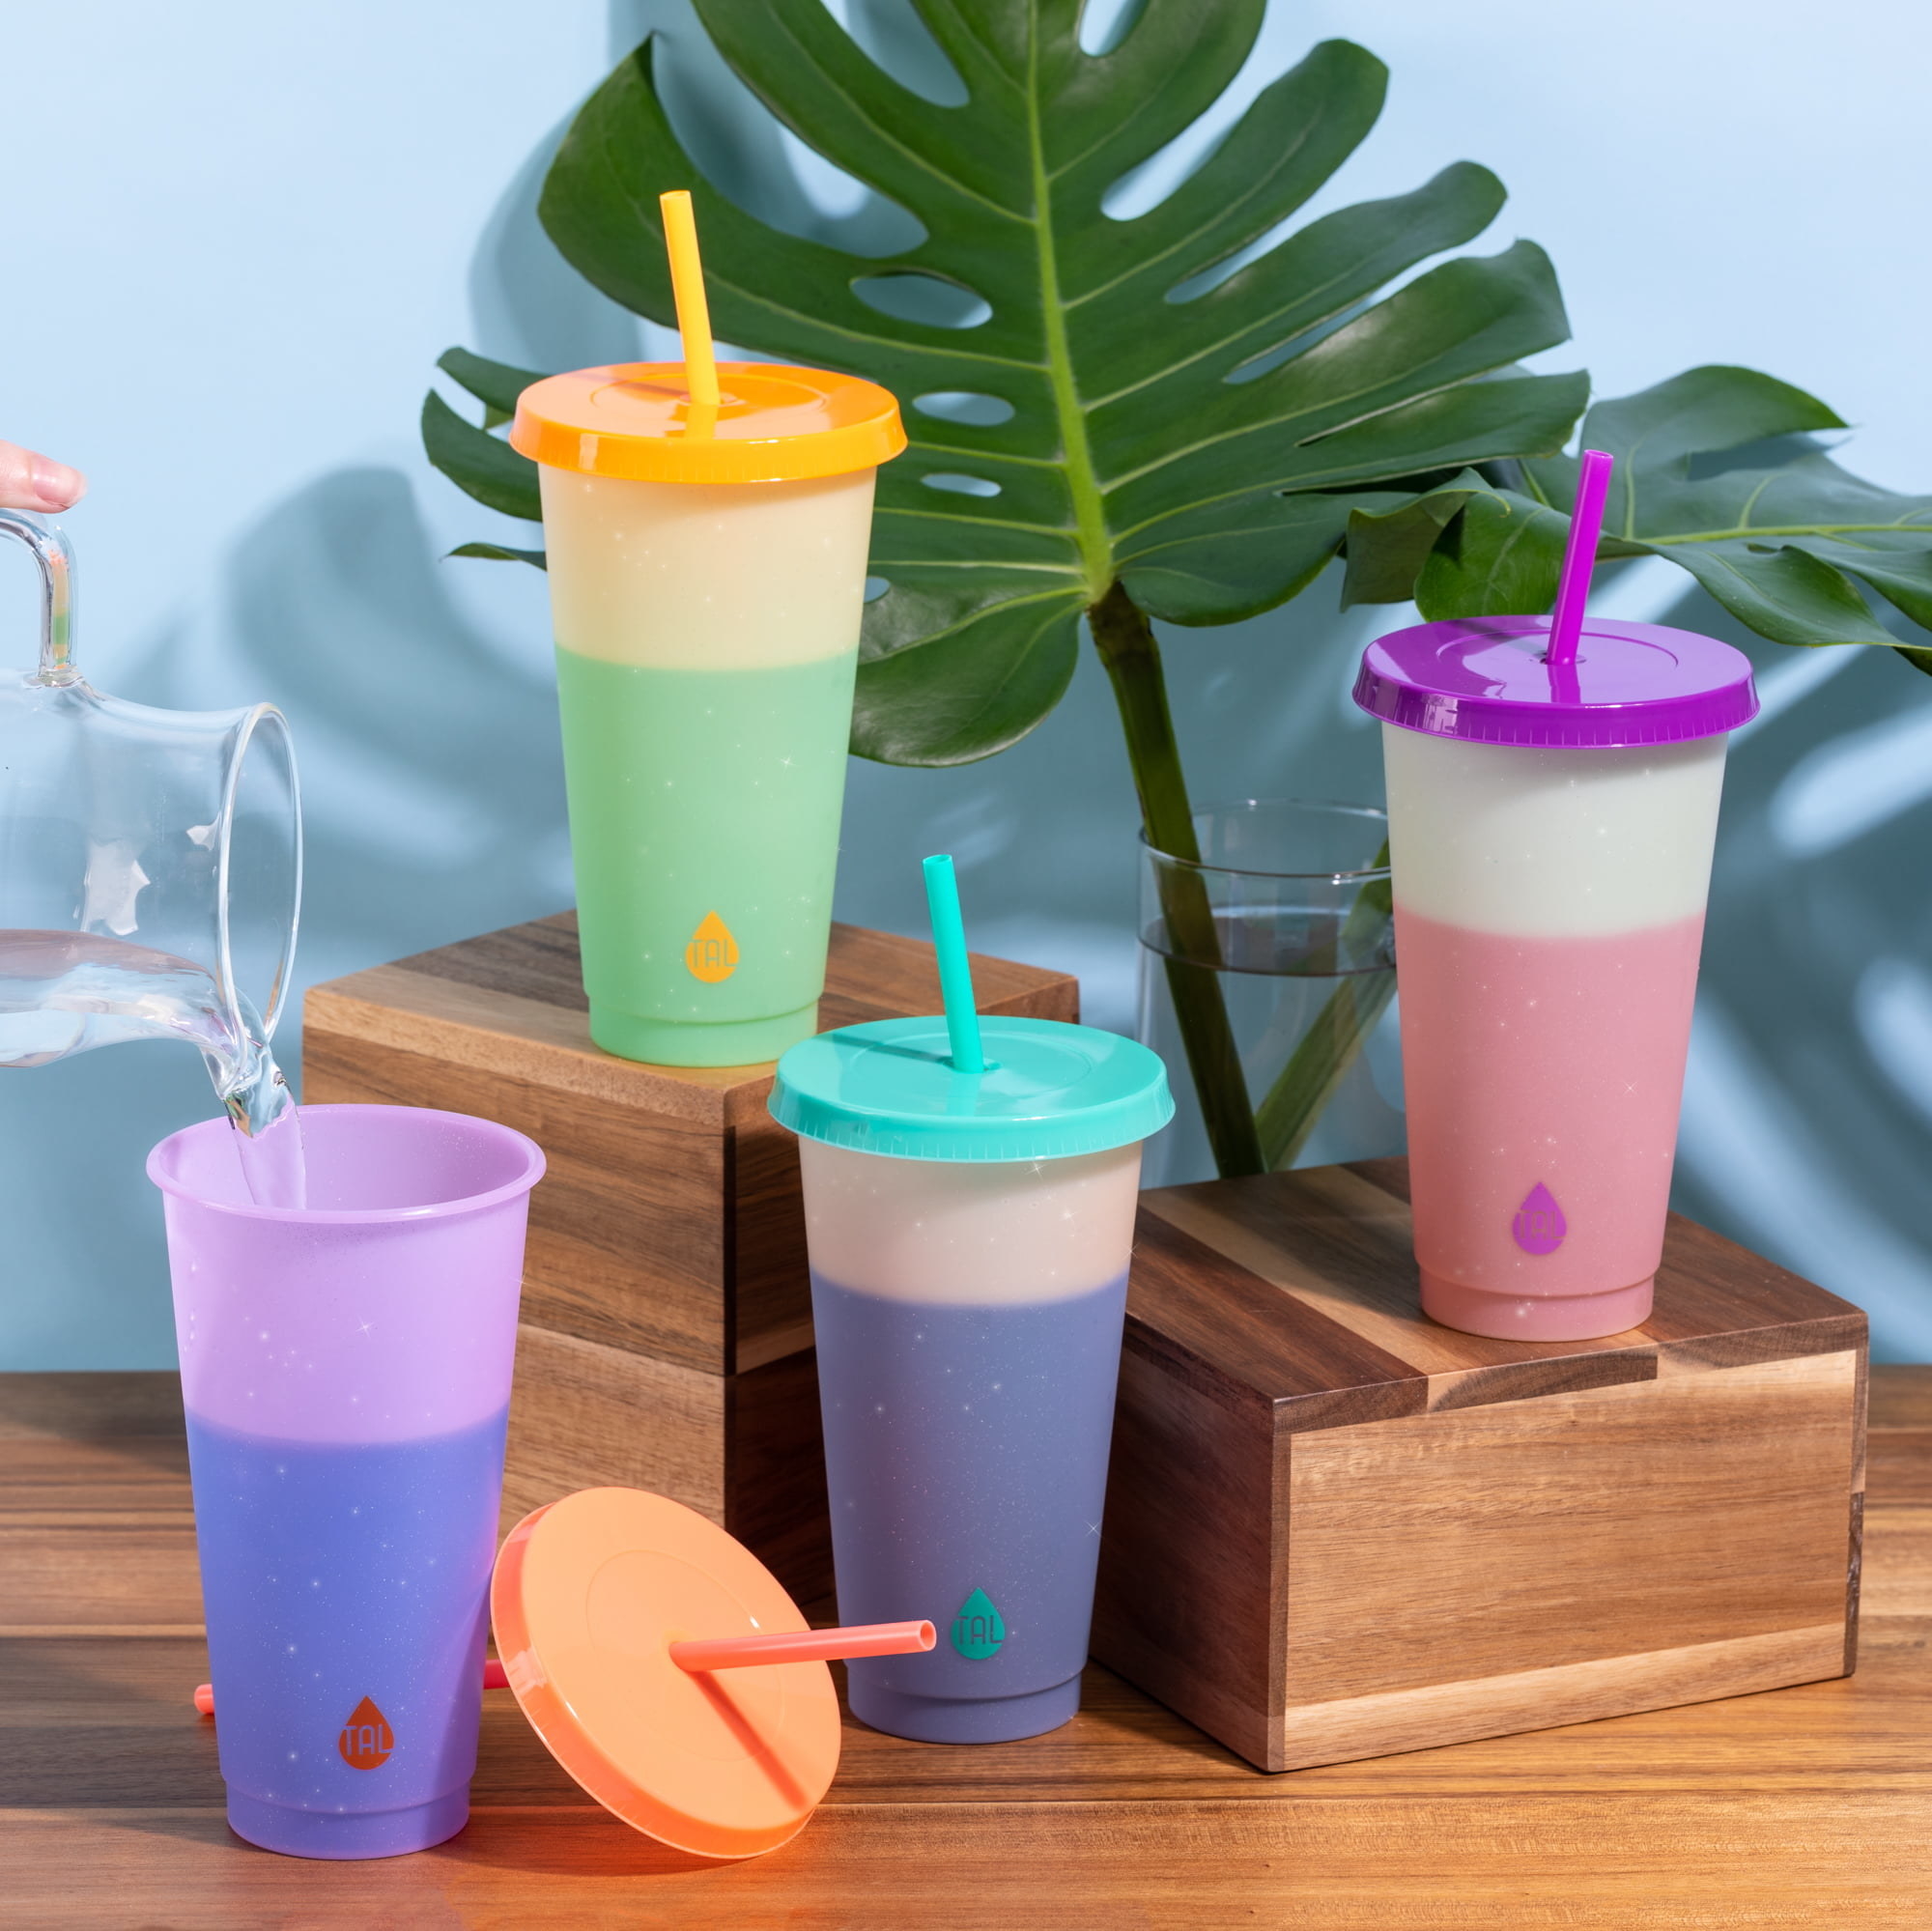 the tumblers in various bright colors